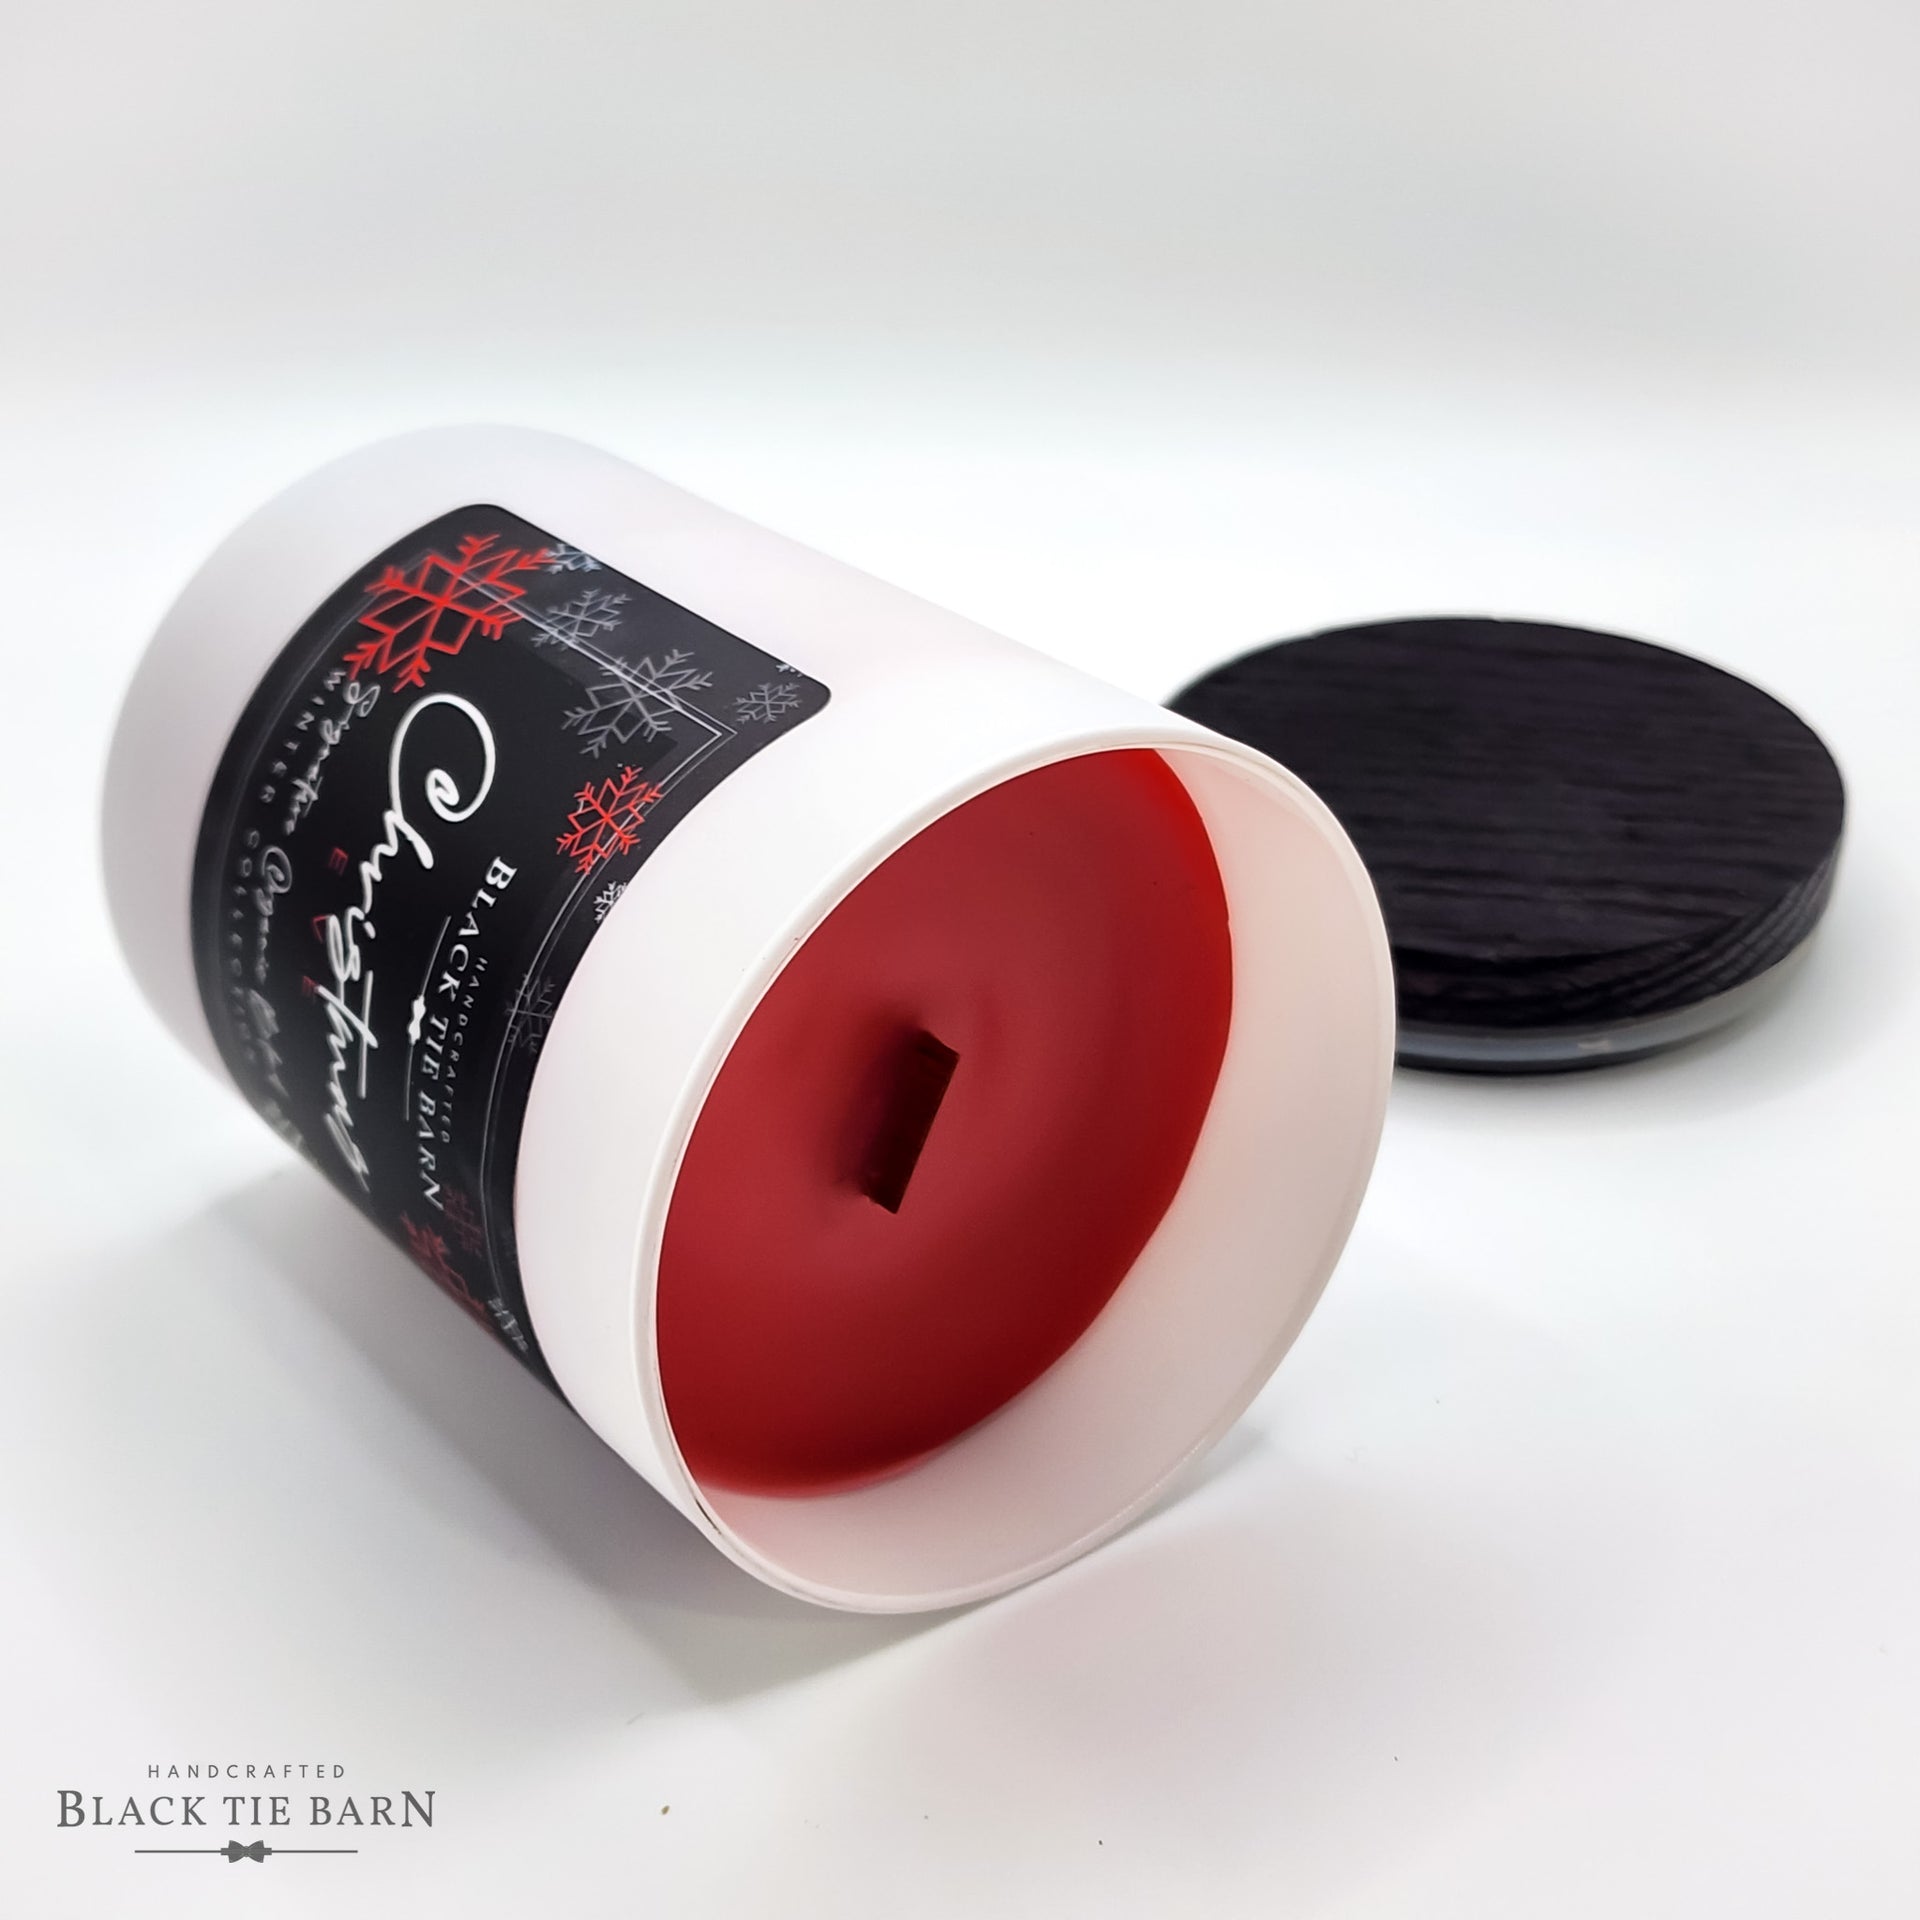 NEW FRAGRANCE OILS by Black Tie Barn  Candle Making Fragrance Oils (The  Launch Story) 